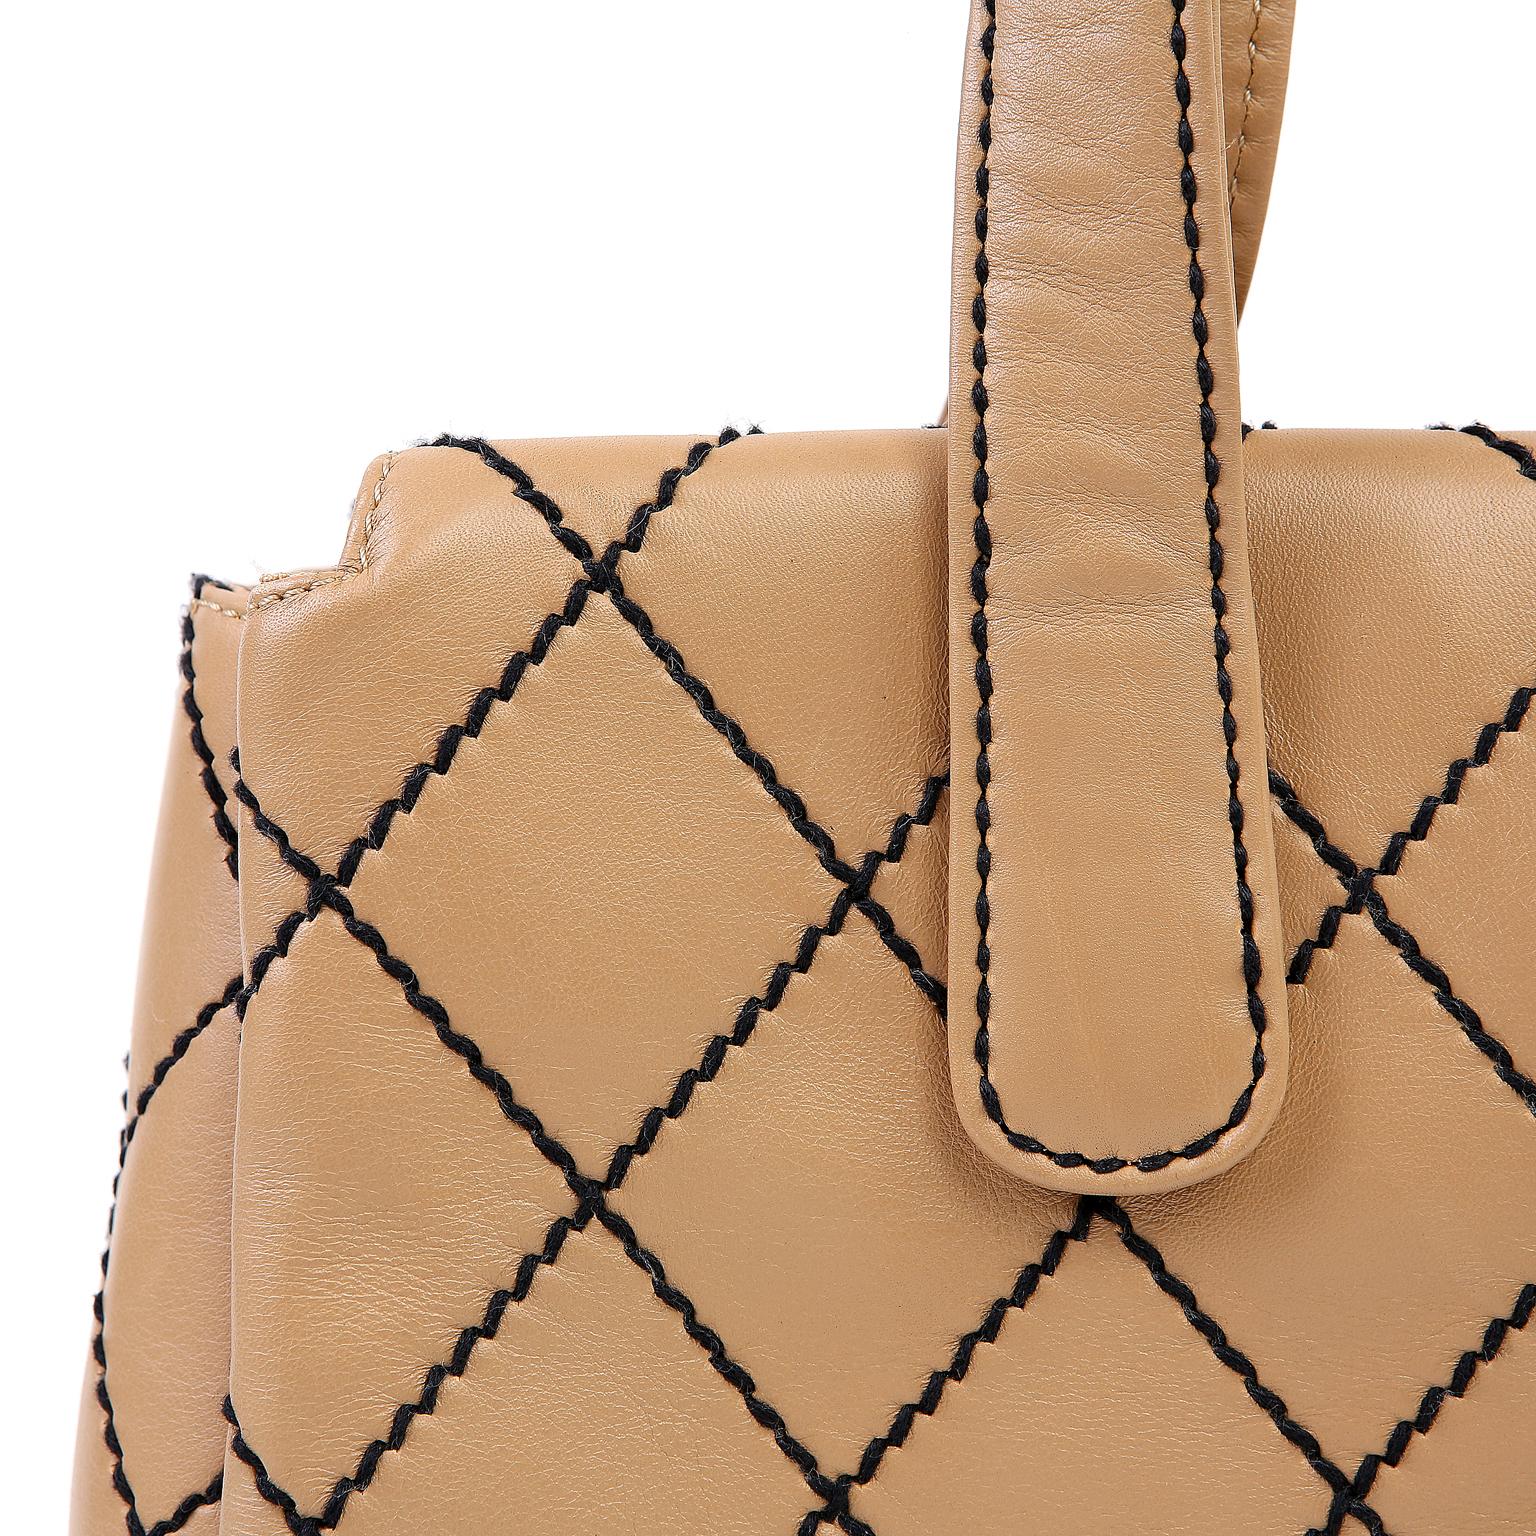 Chanel Beige Leather Tote with Black Top Stitching 3